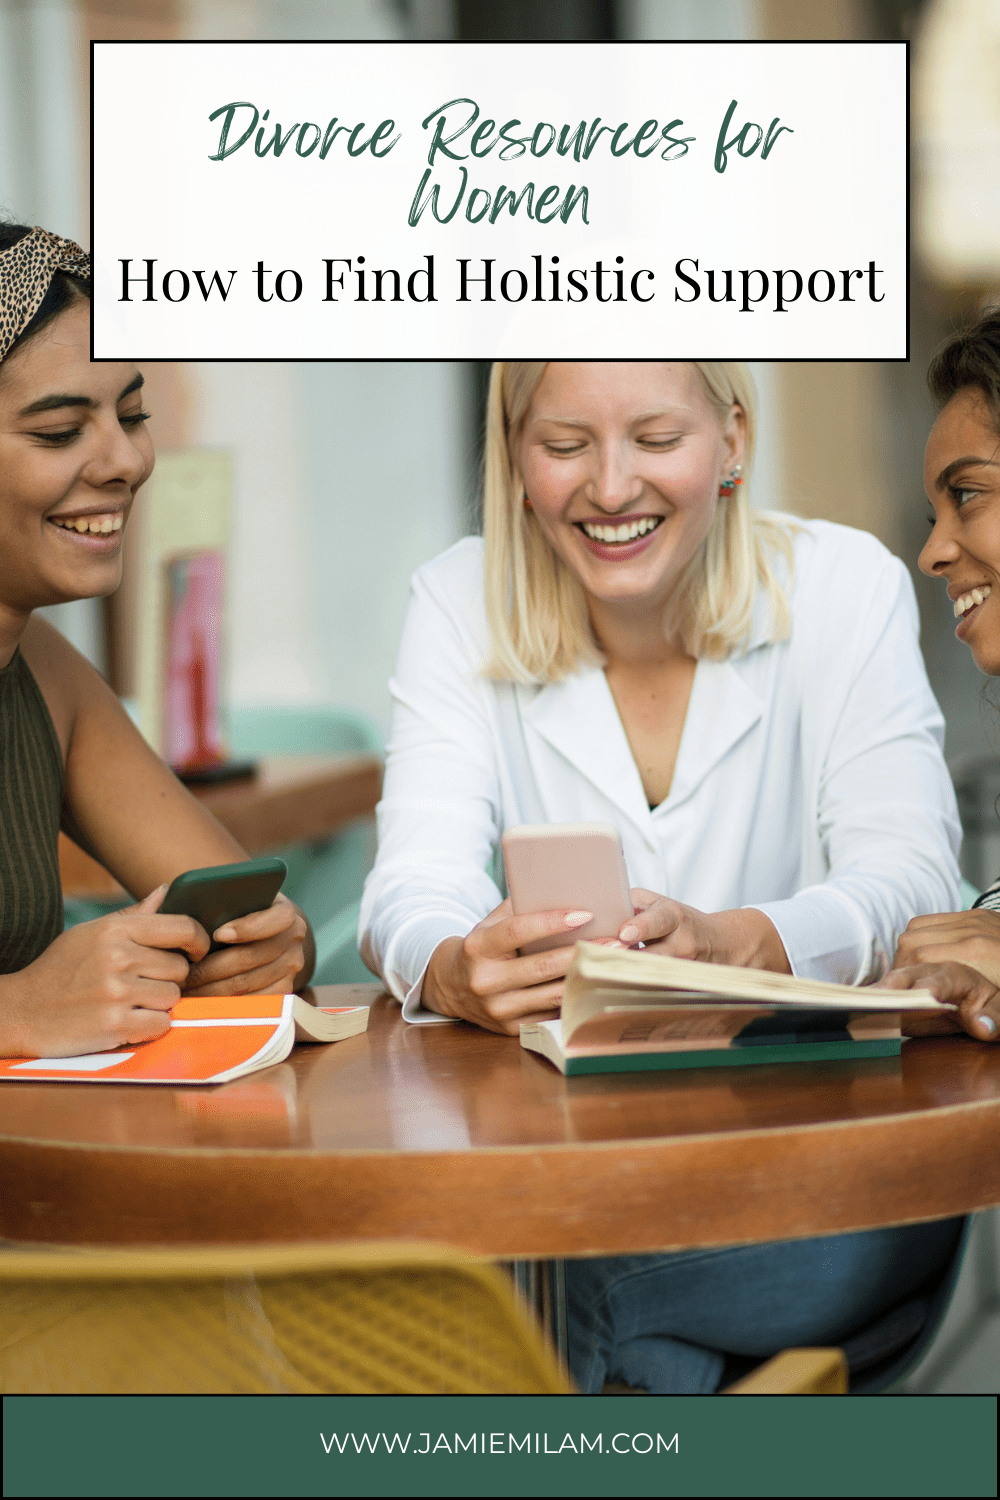 Image of three women talking with the text "Divorce Resources for Women: How to Find Holistic Support"